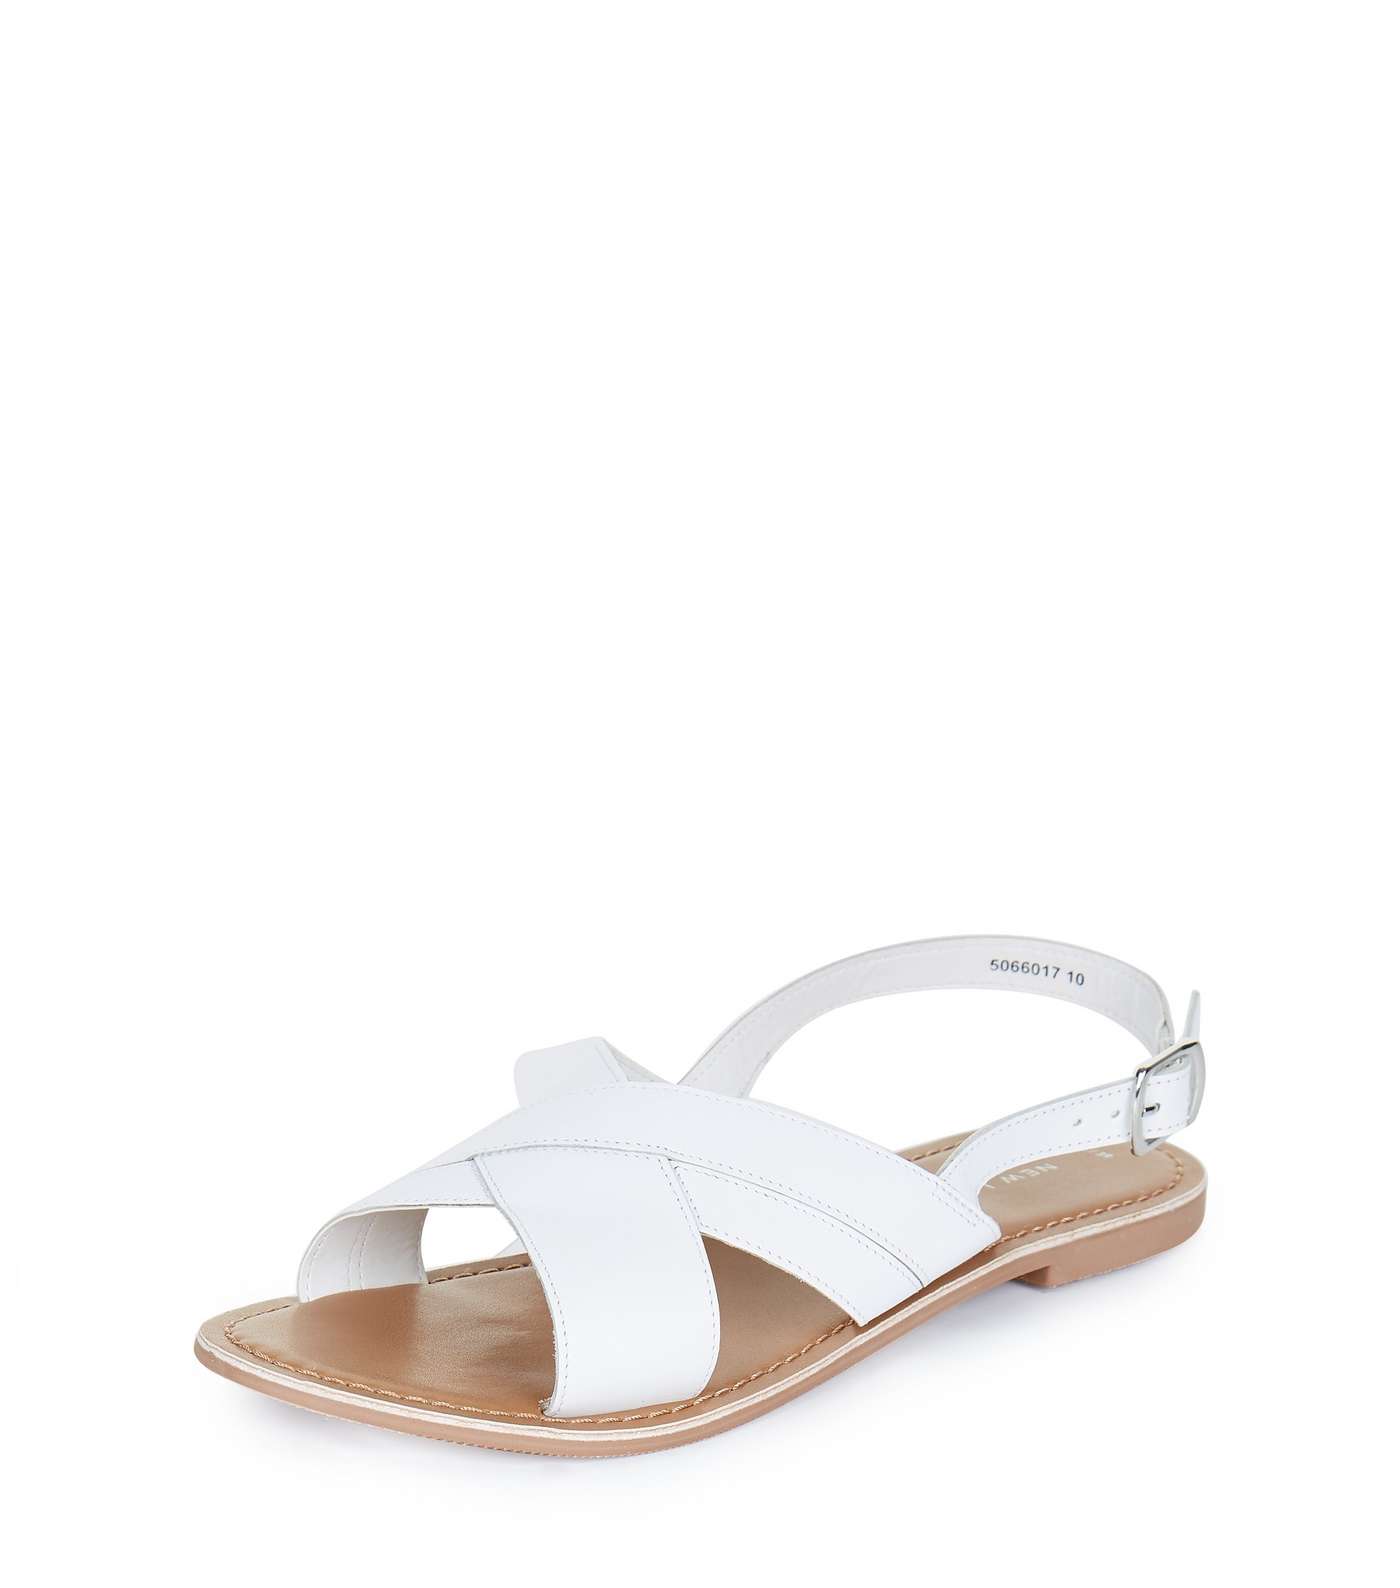 White Leather Cross Strap Slingback Sandals Image 4